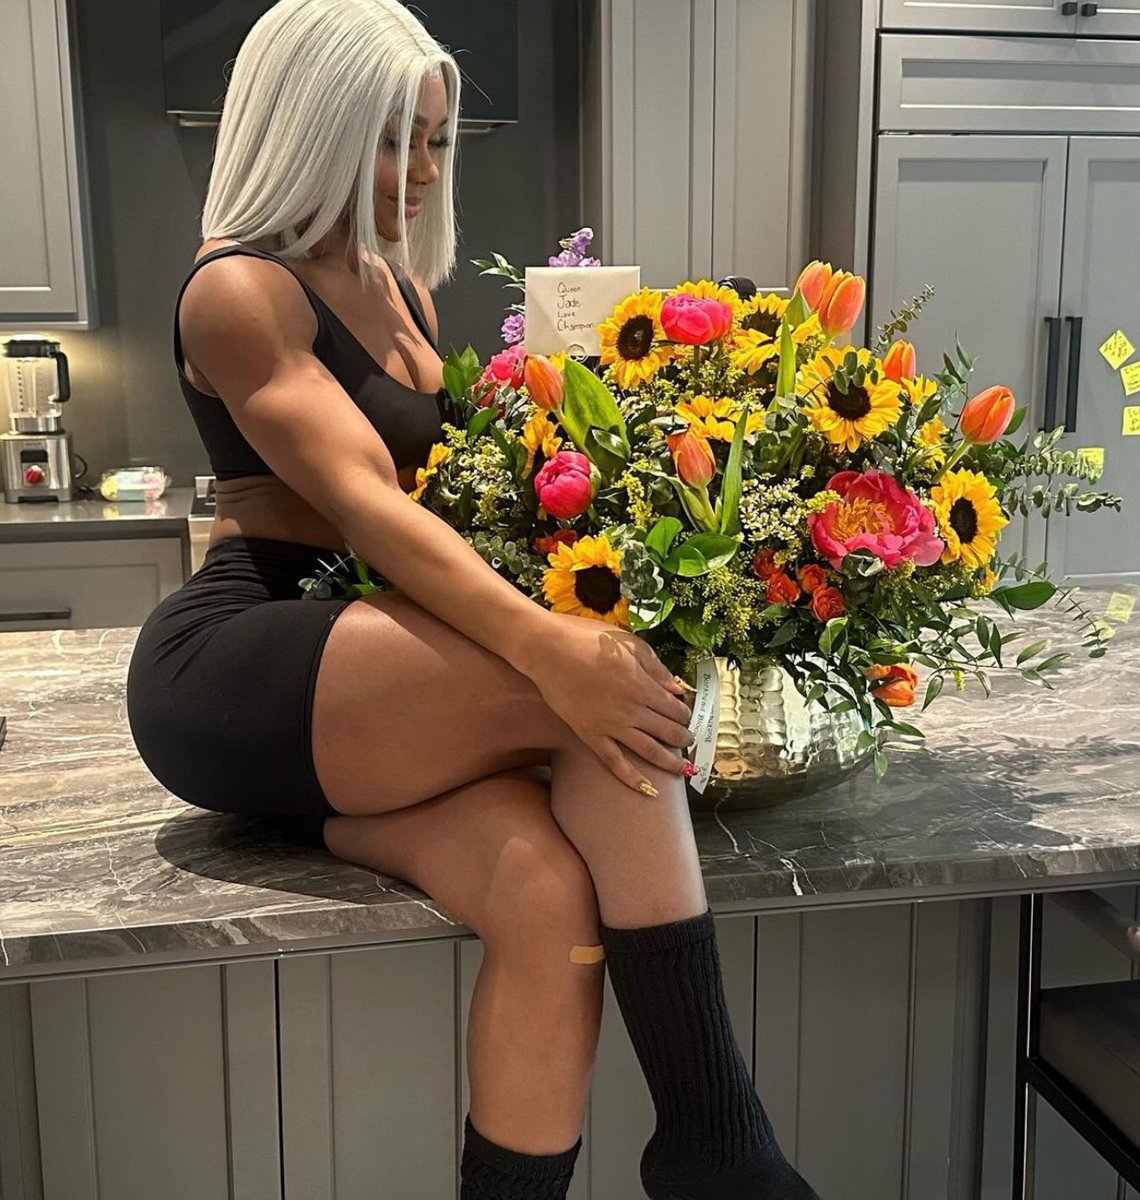 Jade Cargill’s husband Brandon Phillips got her special followers to celebrate her first WWE title 💐